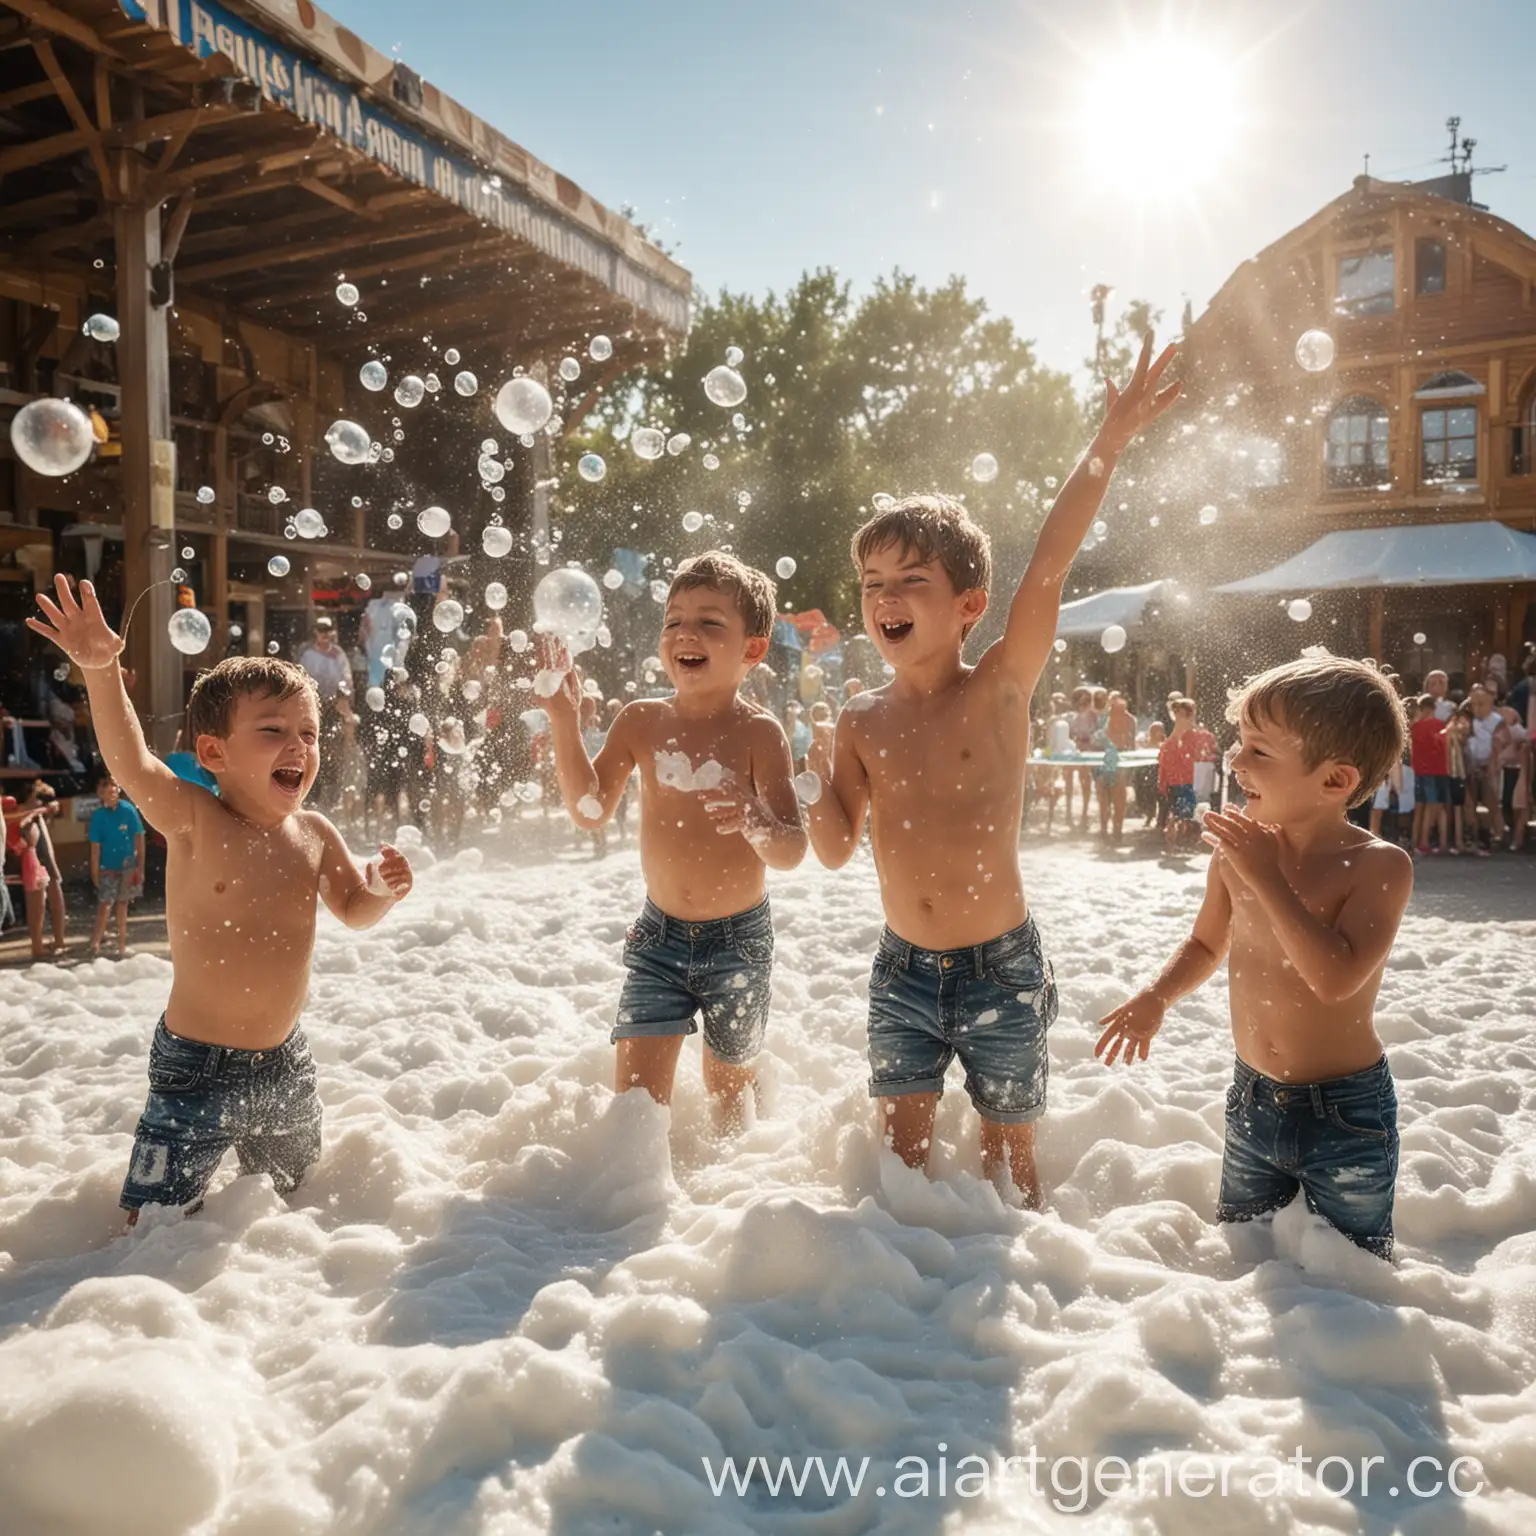 Joyful-Boys-Playing-with-Bubbles-and-Foam-in-Sunny-Amusement-Park